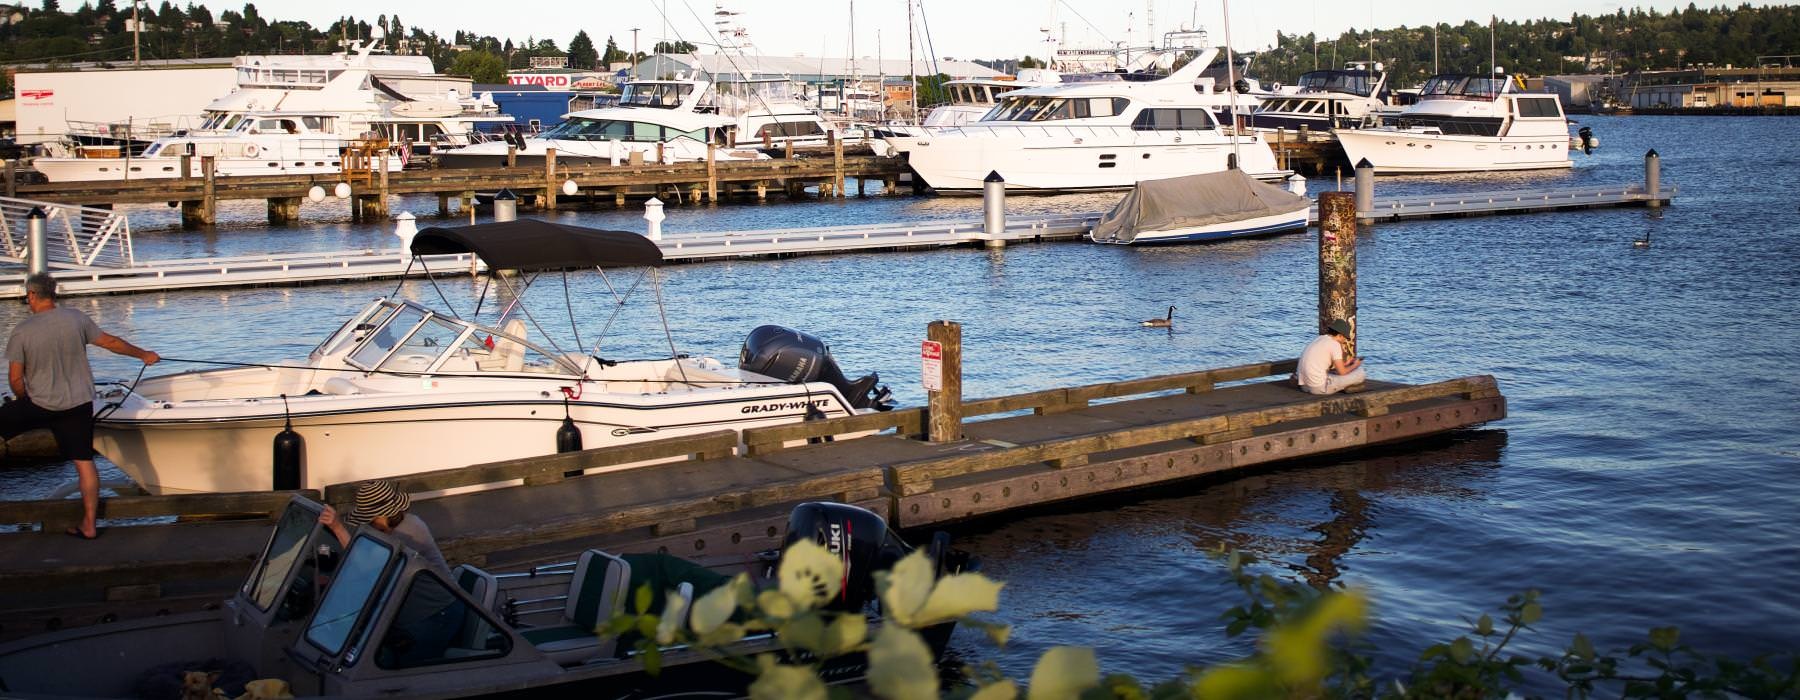 boats docked at a pier